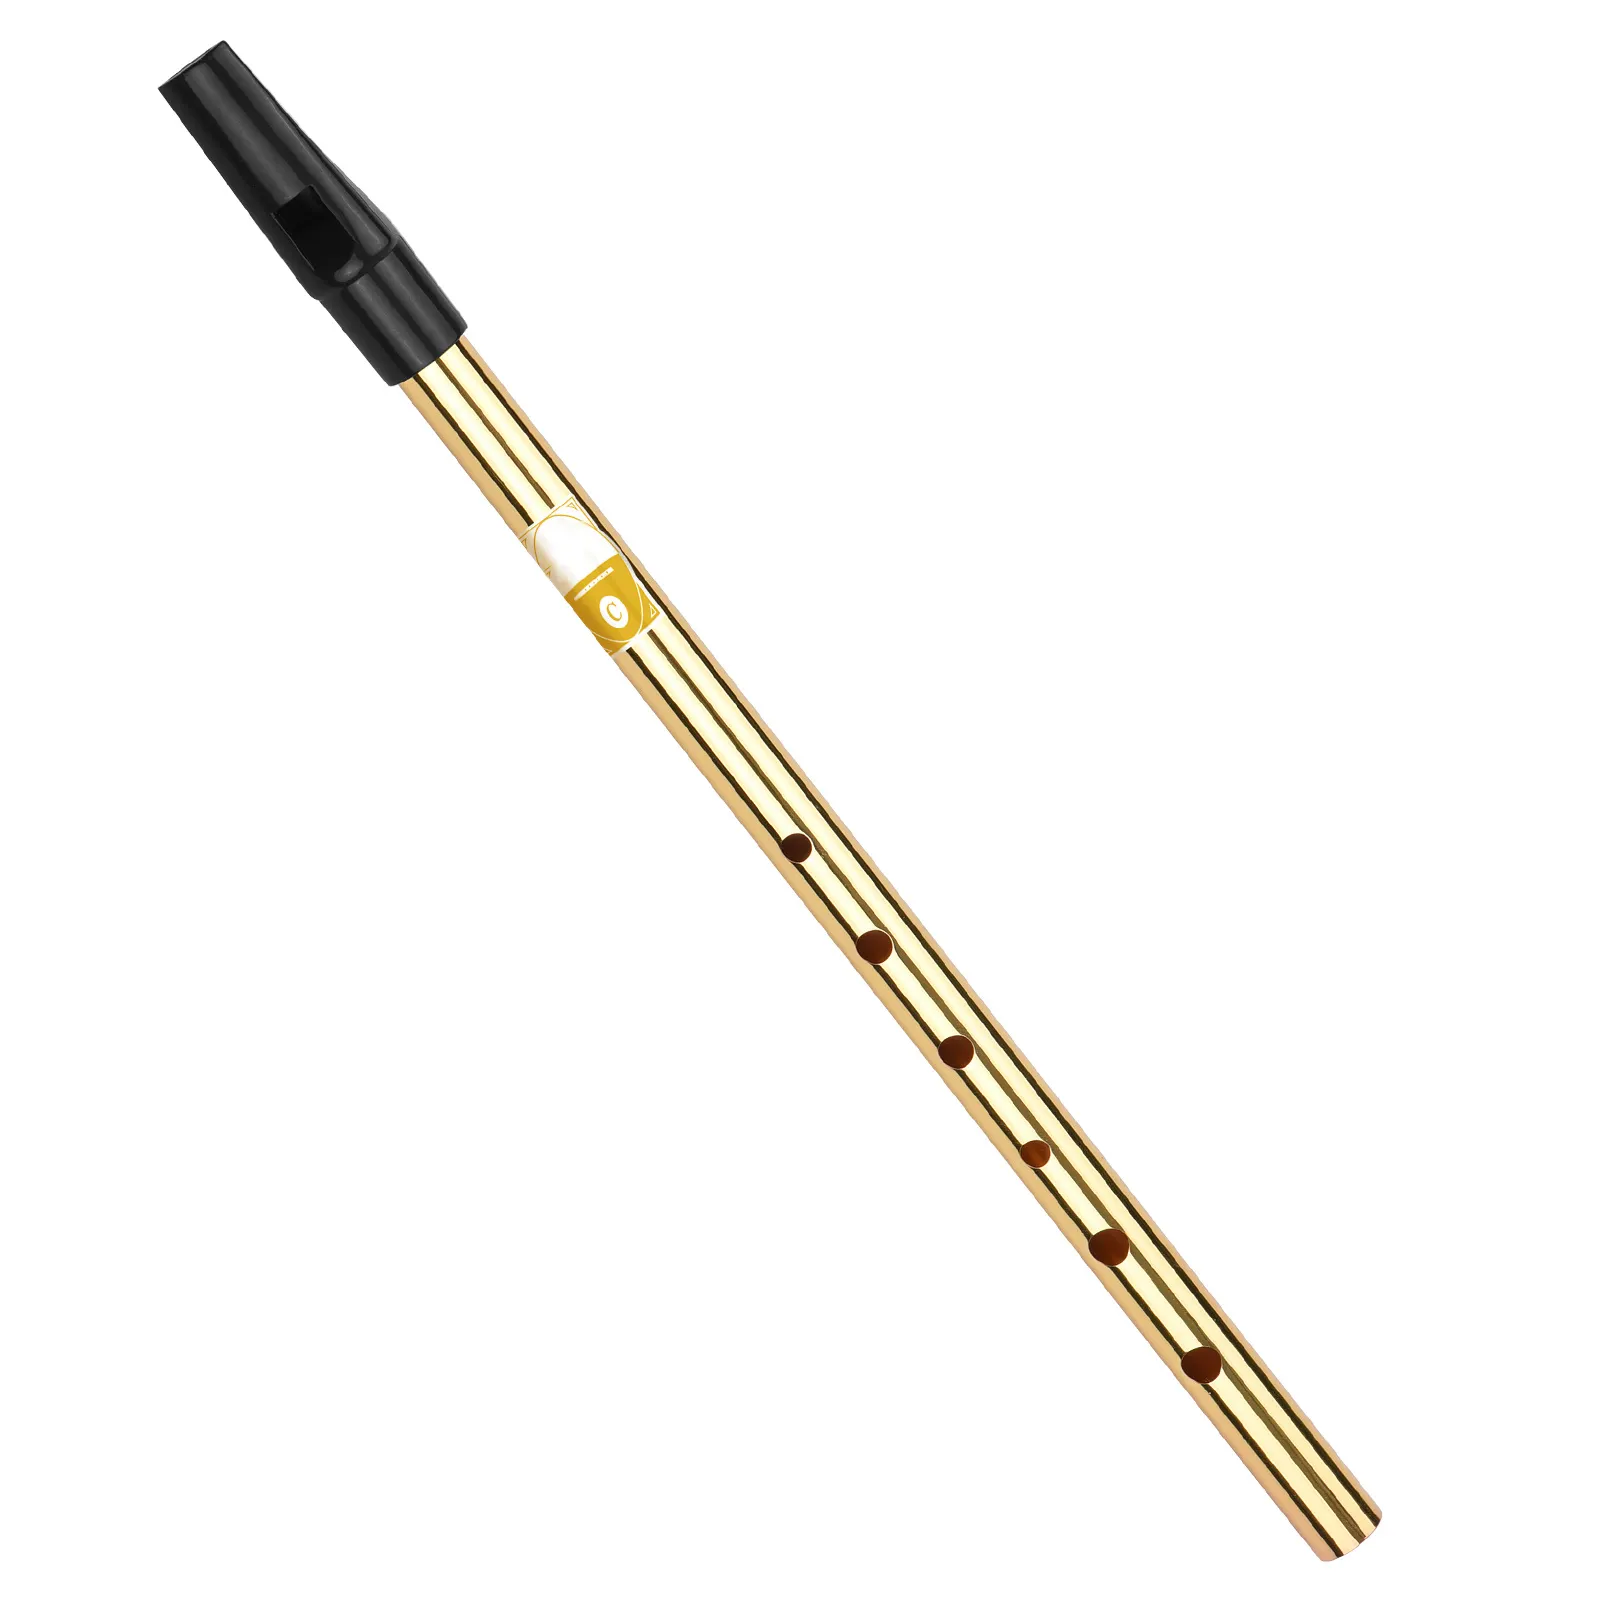 Irish Whistle Flute Key of C 6 Holes Flute Wind Musical Instruments for Beginners Intermediates Experts